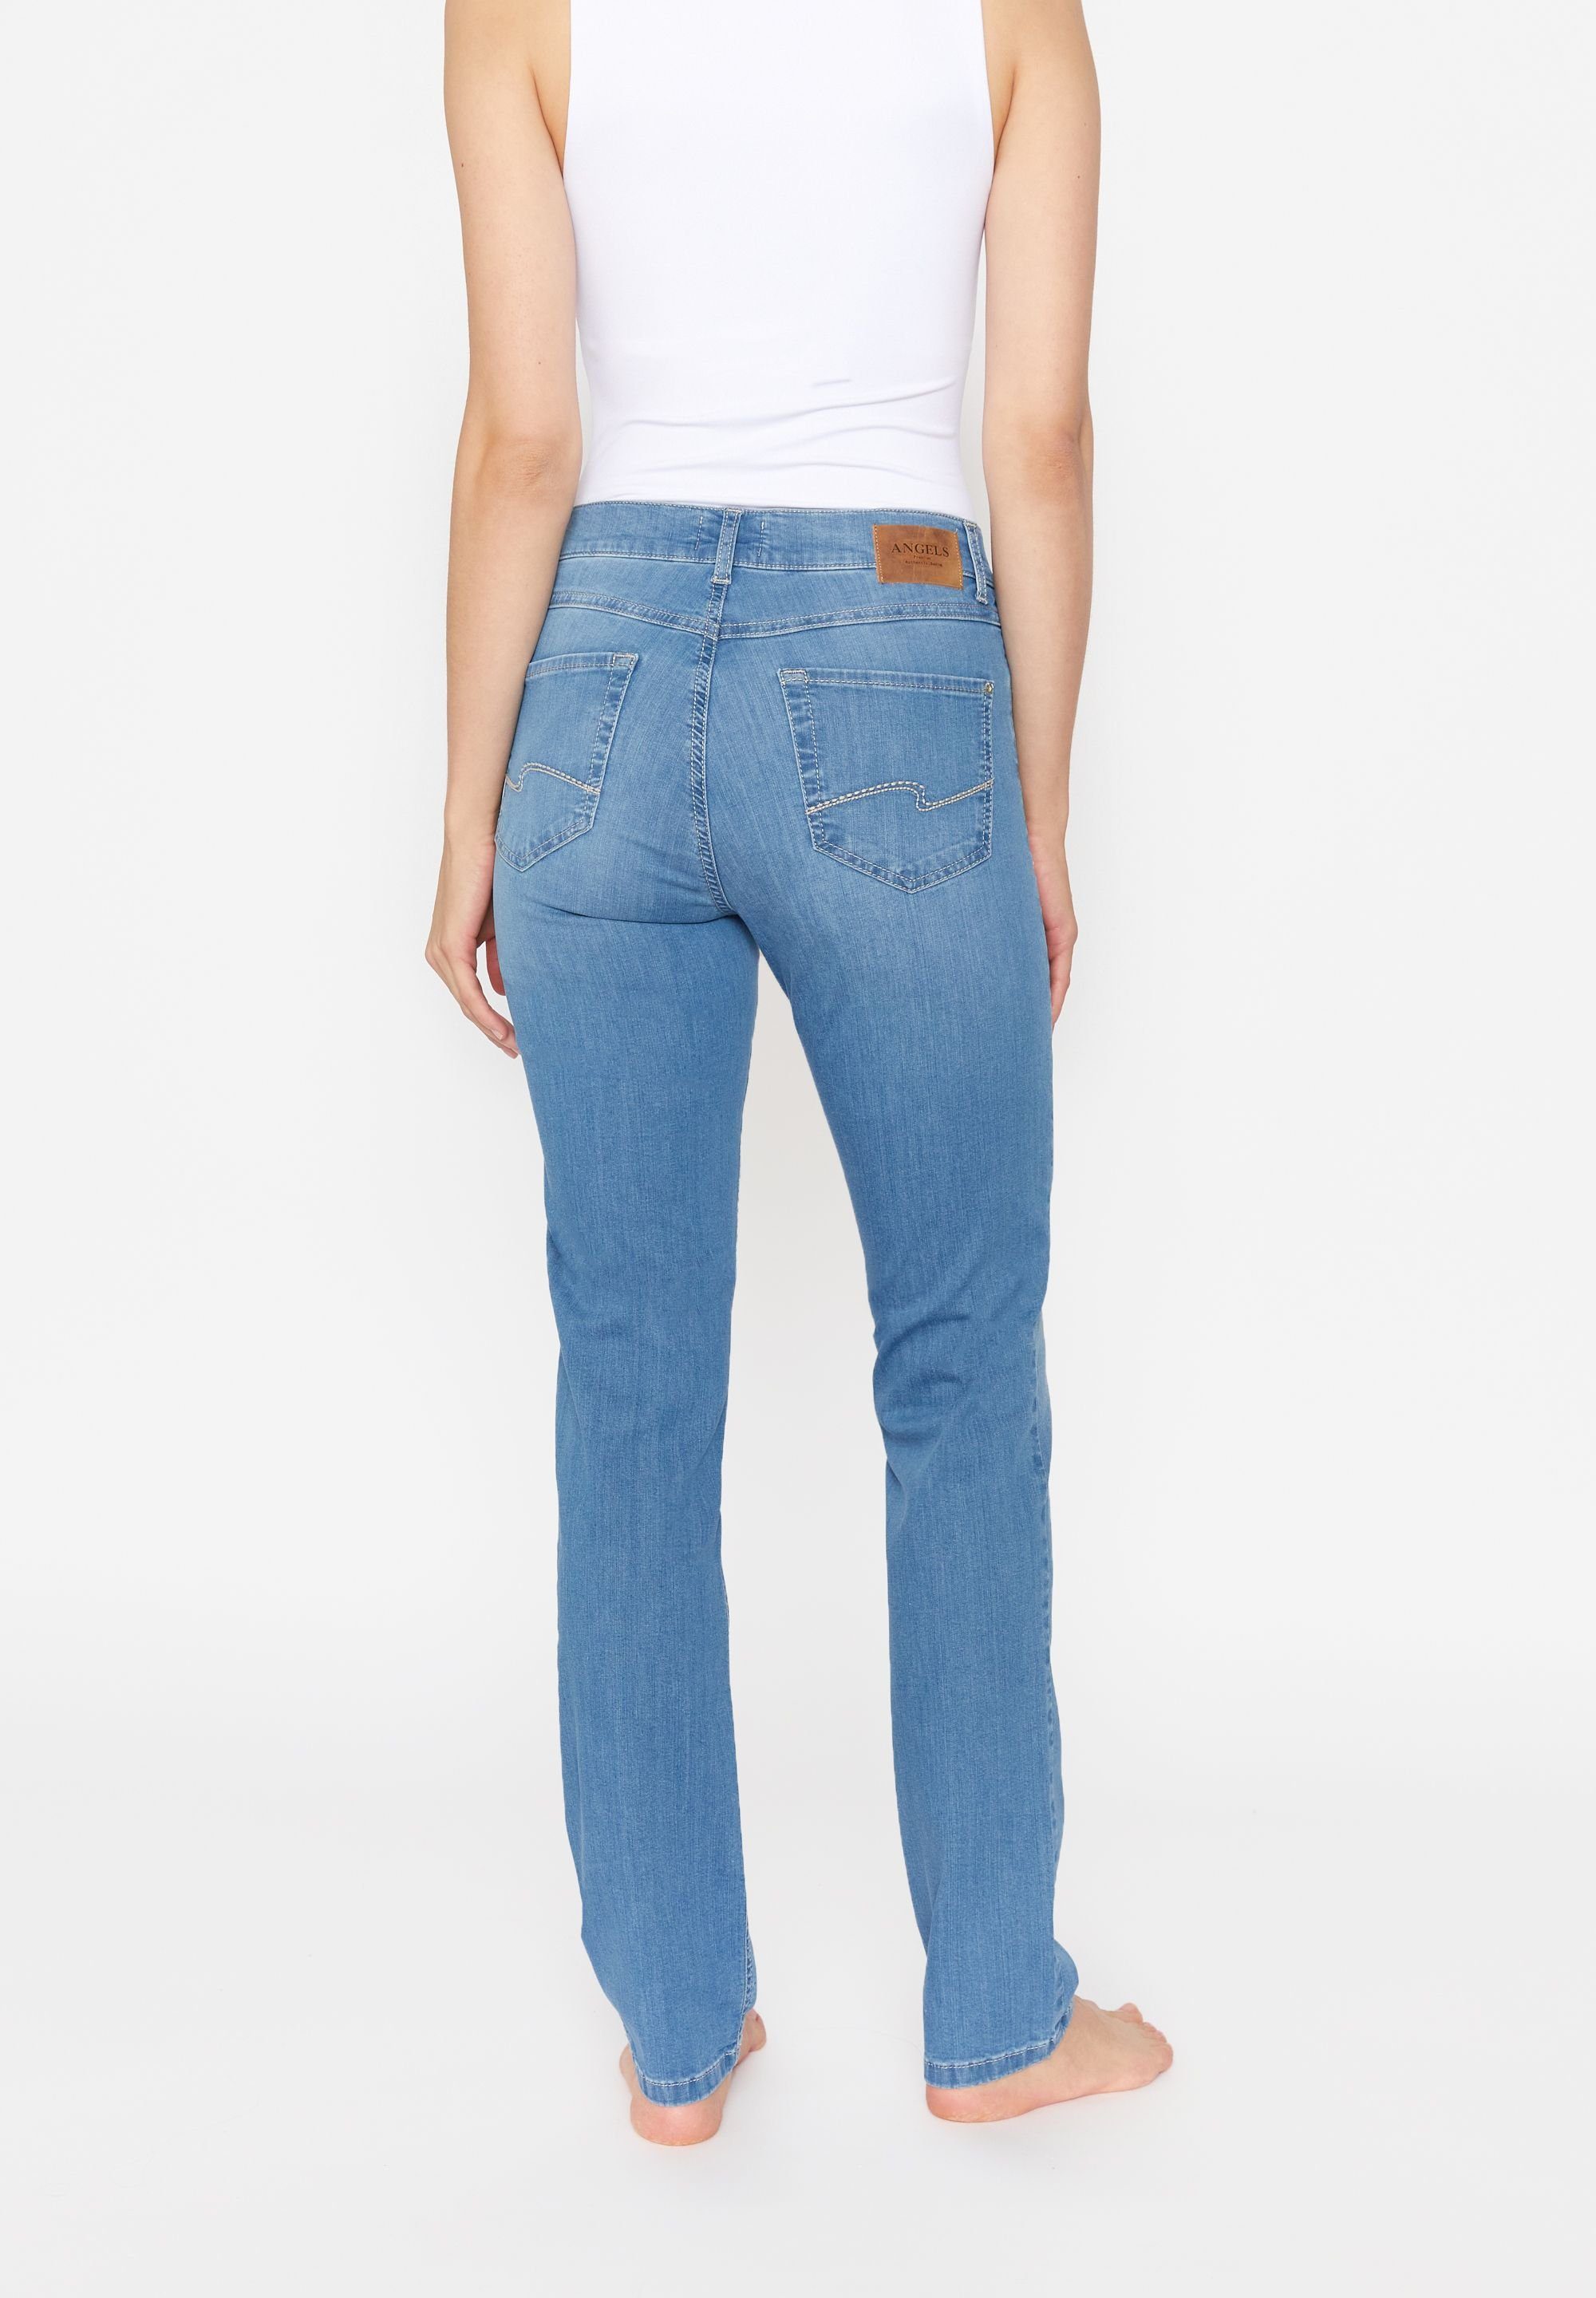 ANGELS Skinny-fit-Jeans